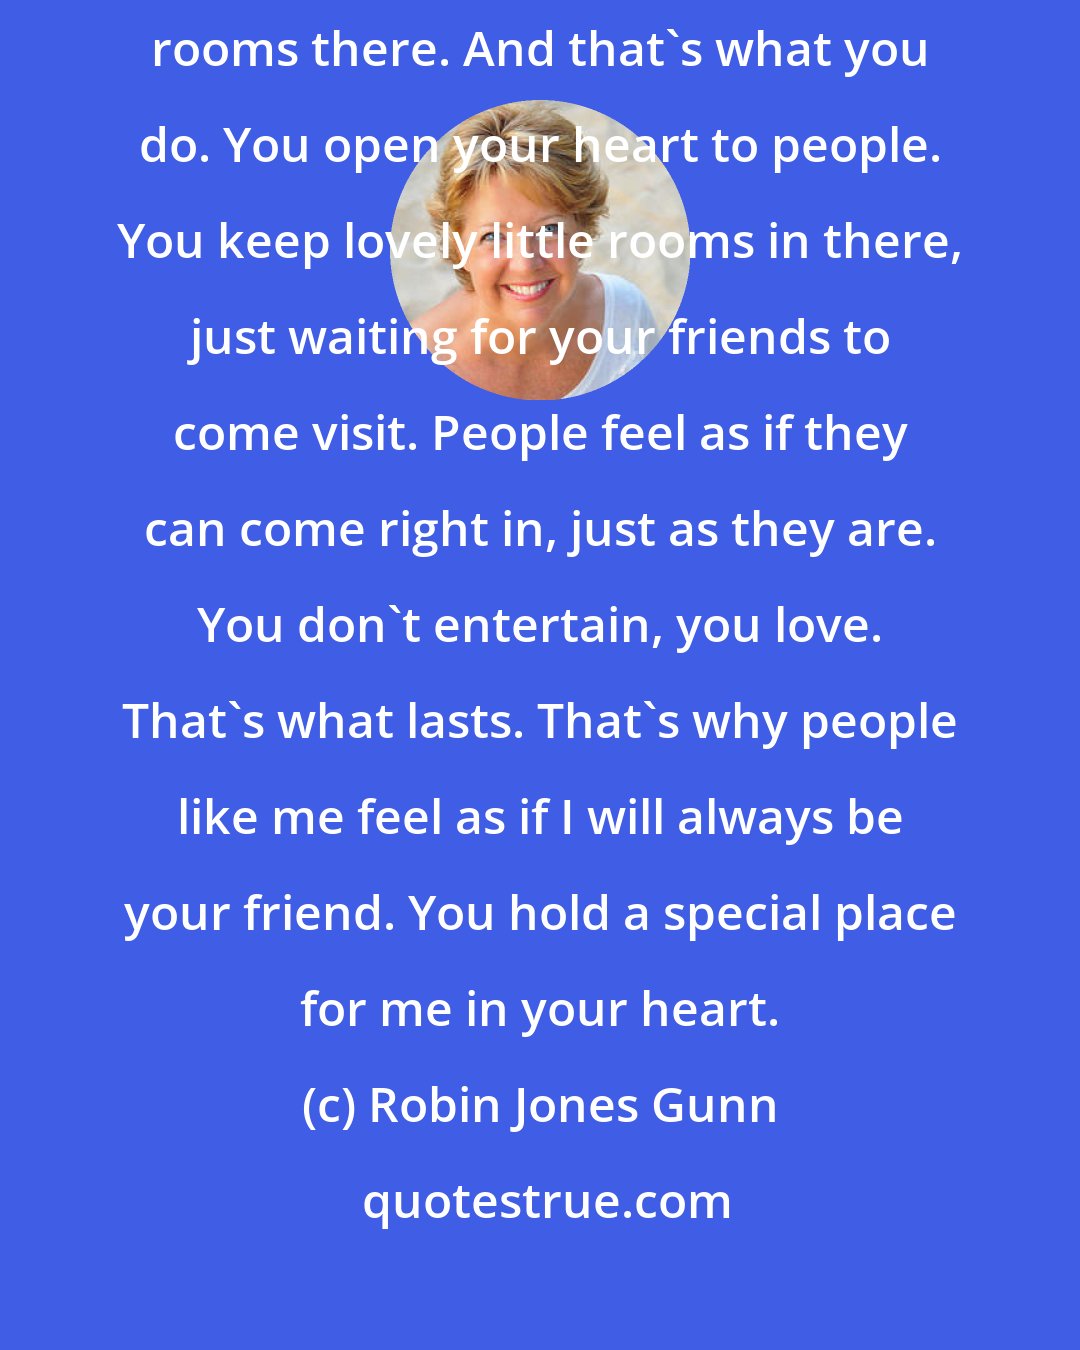 Robin Jones Gunn: Who needs a house? I'm talking about your heart. You have plenty of guest rooms there. And that's what you do. You open your heart to people. You keep lovely little rooms in there, just waiting for your friends to come visit. People feel as if they can come right in, just as they are. You don't entertain, you love. That's what lasts. That's why people like me feel as if I will always be your friend. You hold a special place for me in your heart.